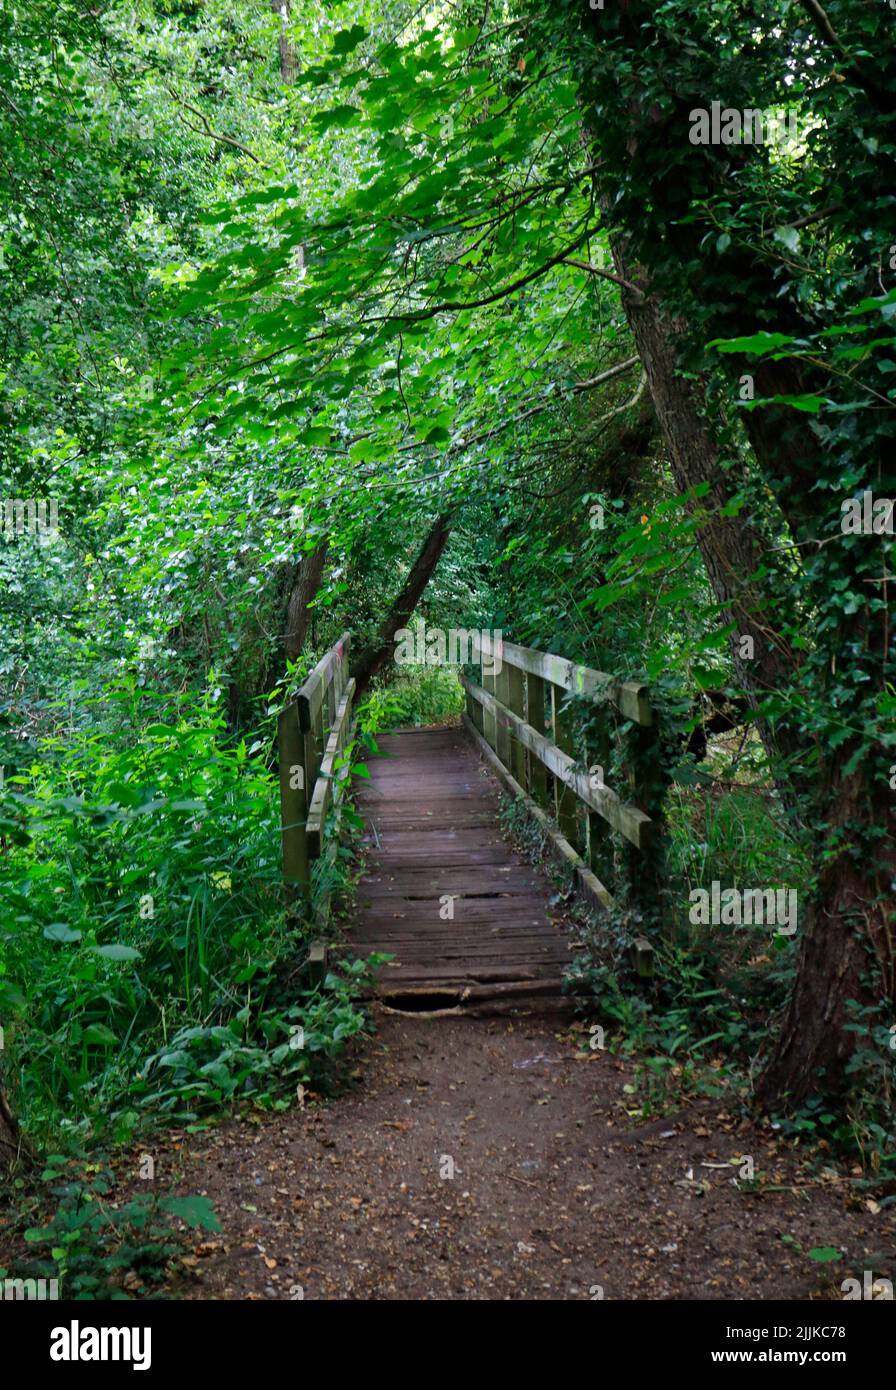 A view of a wooden pedestrian footbridge on a footpath through Train Wood near the former City Station in the City of Norwich, Norfolk, England, UK. Stock Photo